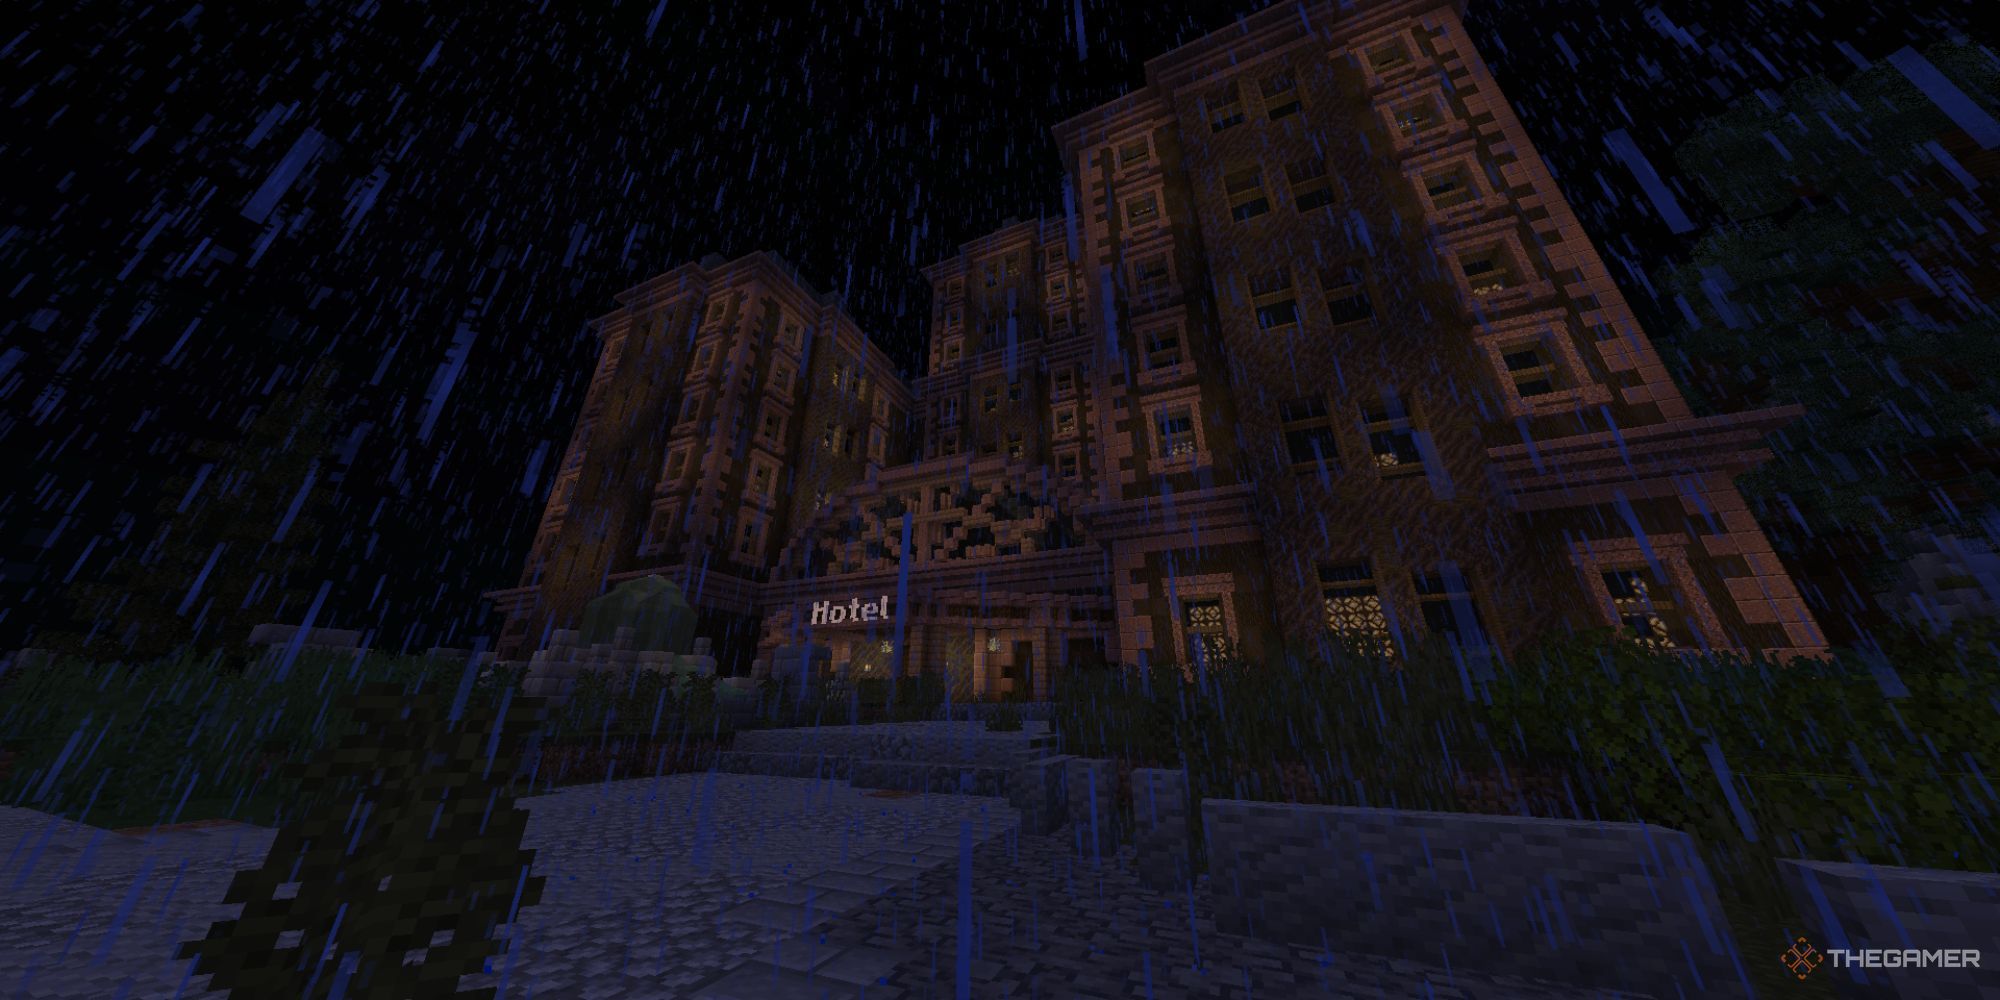 A dark, rainy screenshot of a tall, multistory hotel with the lights still on.